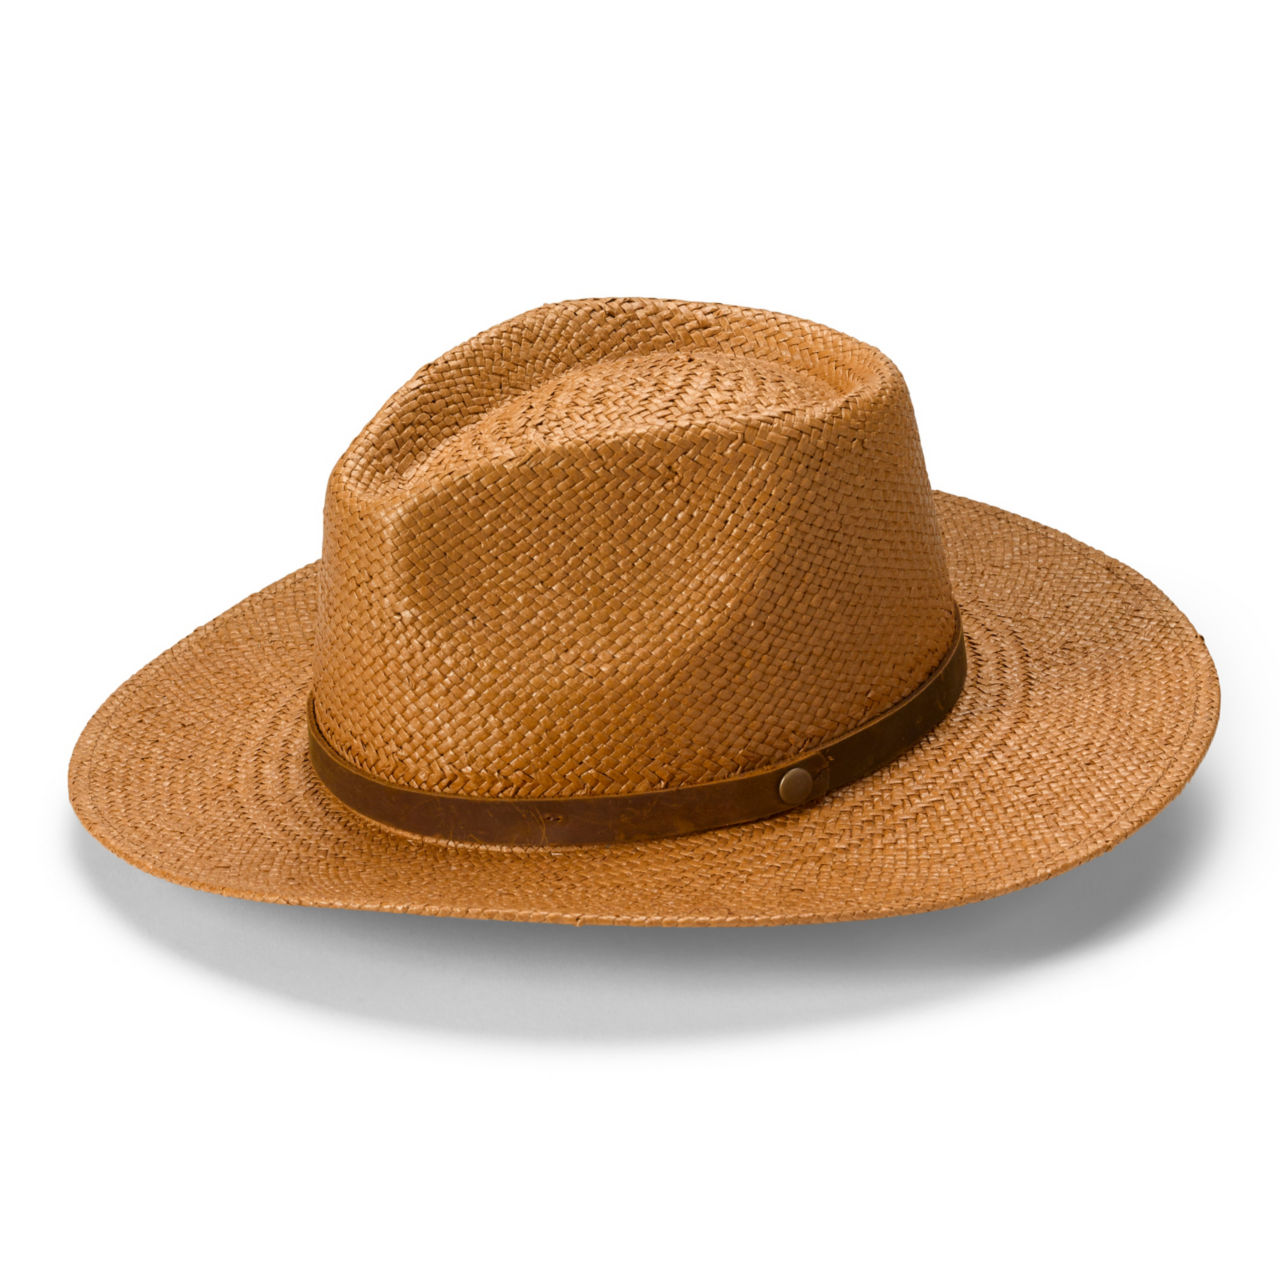 Snowy River Straw Hat - TOBACCO image number 0